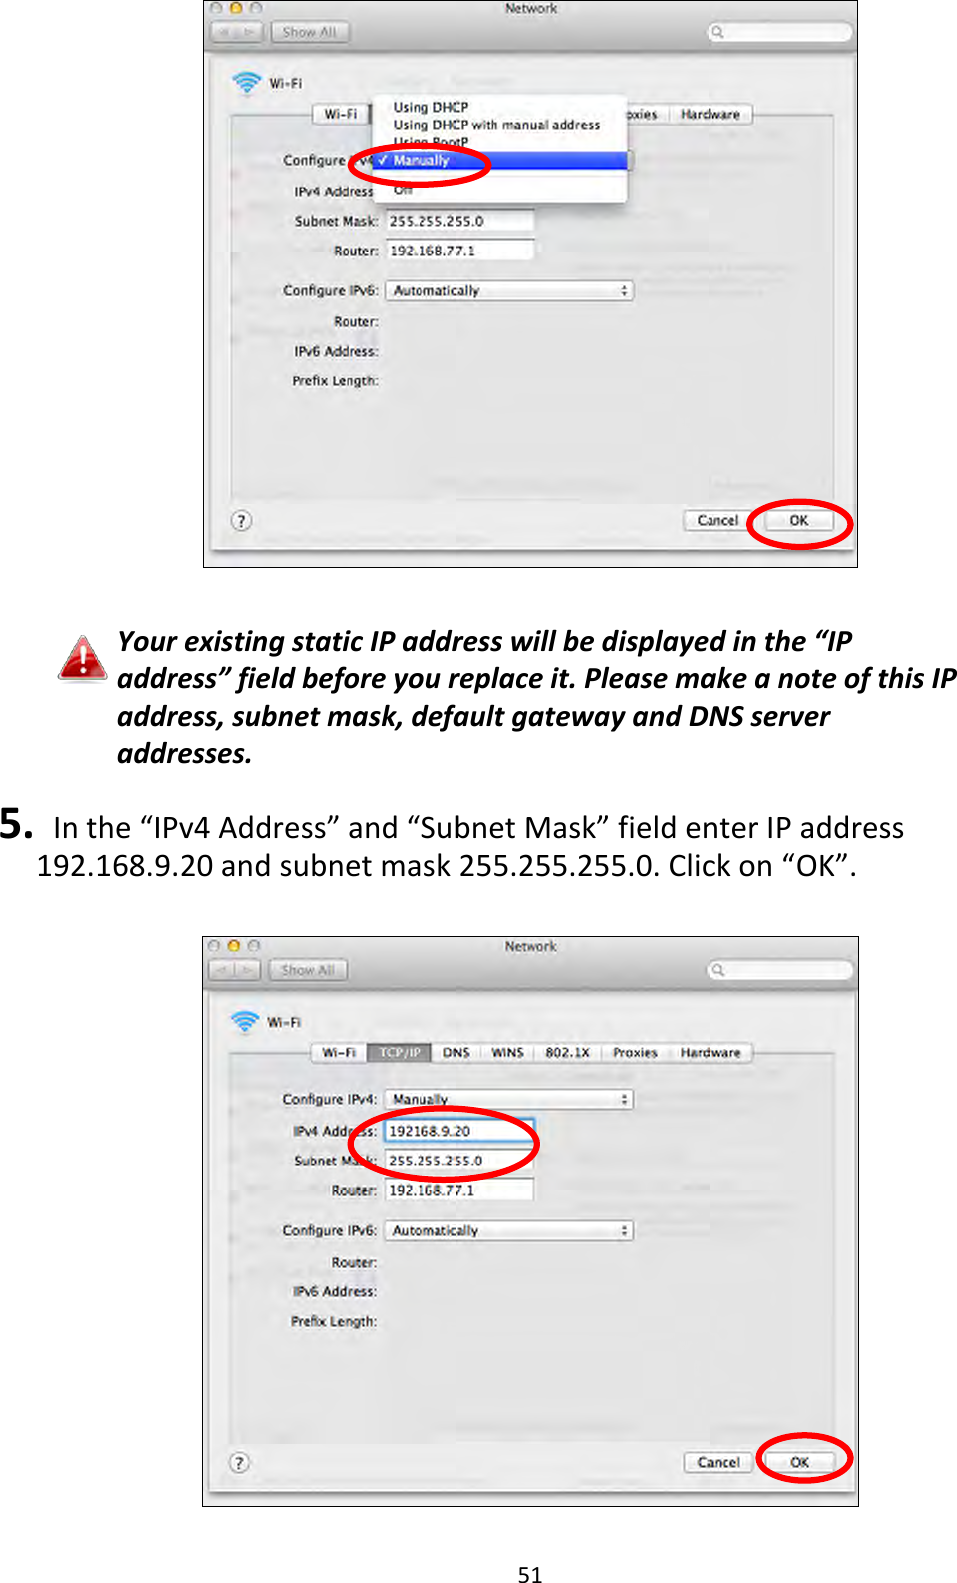 51   Your existing static IP address will be displayed in the “IP address” field before you replace it. Please make a note of this IP address, subnet mask, default gateway and DNS server addresses.  5.   In the “IPv4 Address” and “Subnet Mask” field enter IP address 192.168.9.20 and subnet mask 255.255.255.0. Click on “OK”.    